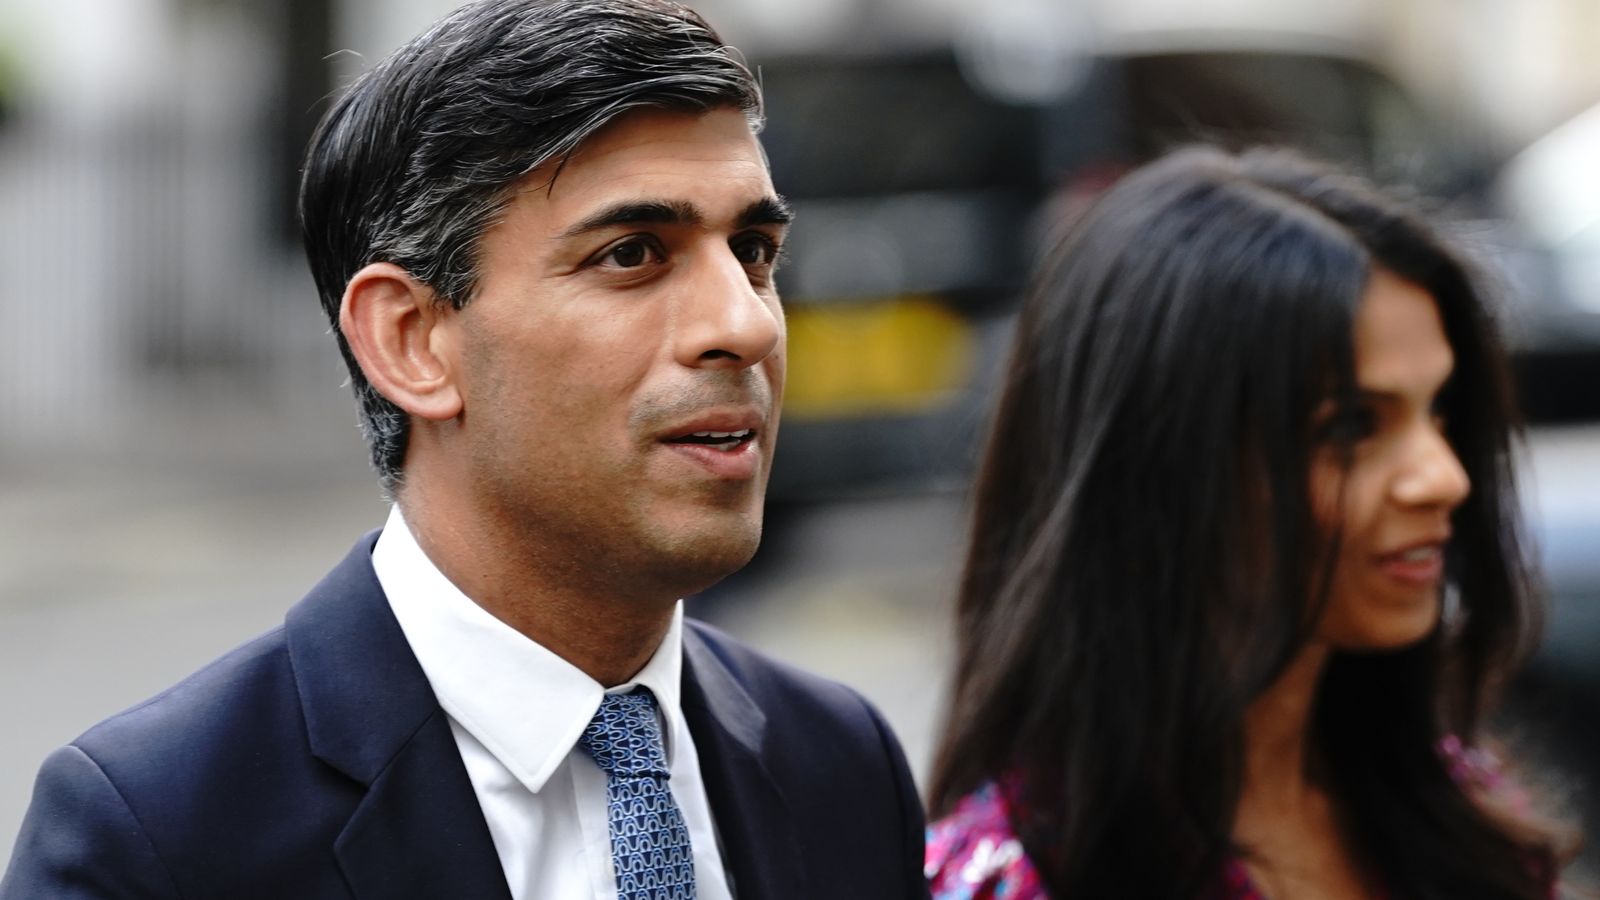 Rishi Sunak will not face sanction after confidentiality rules breach judged 'inadvertent'